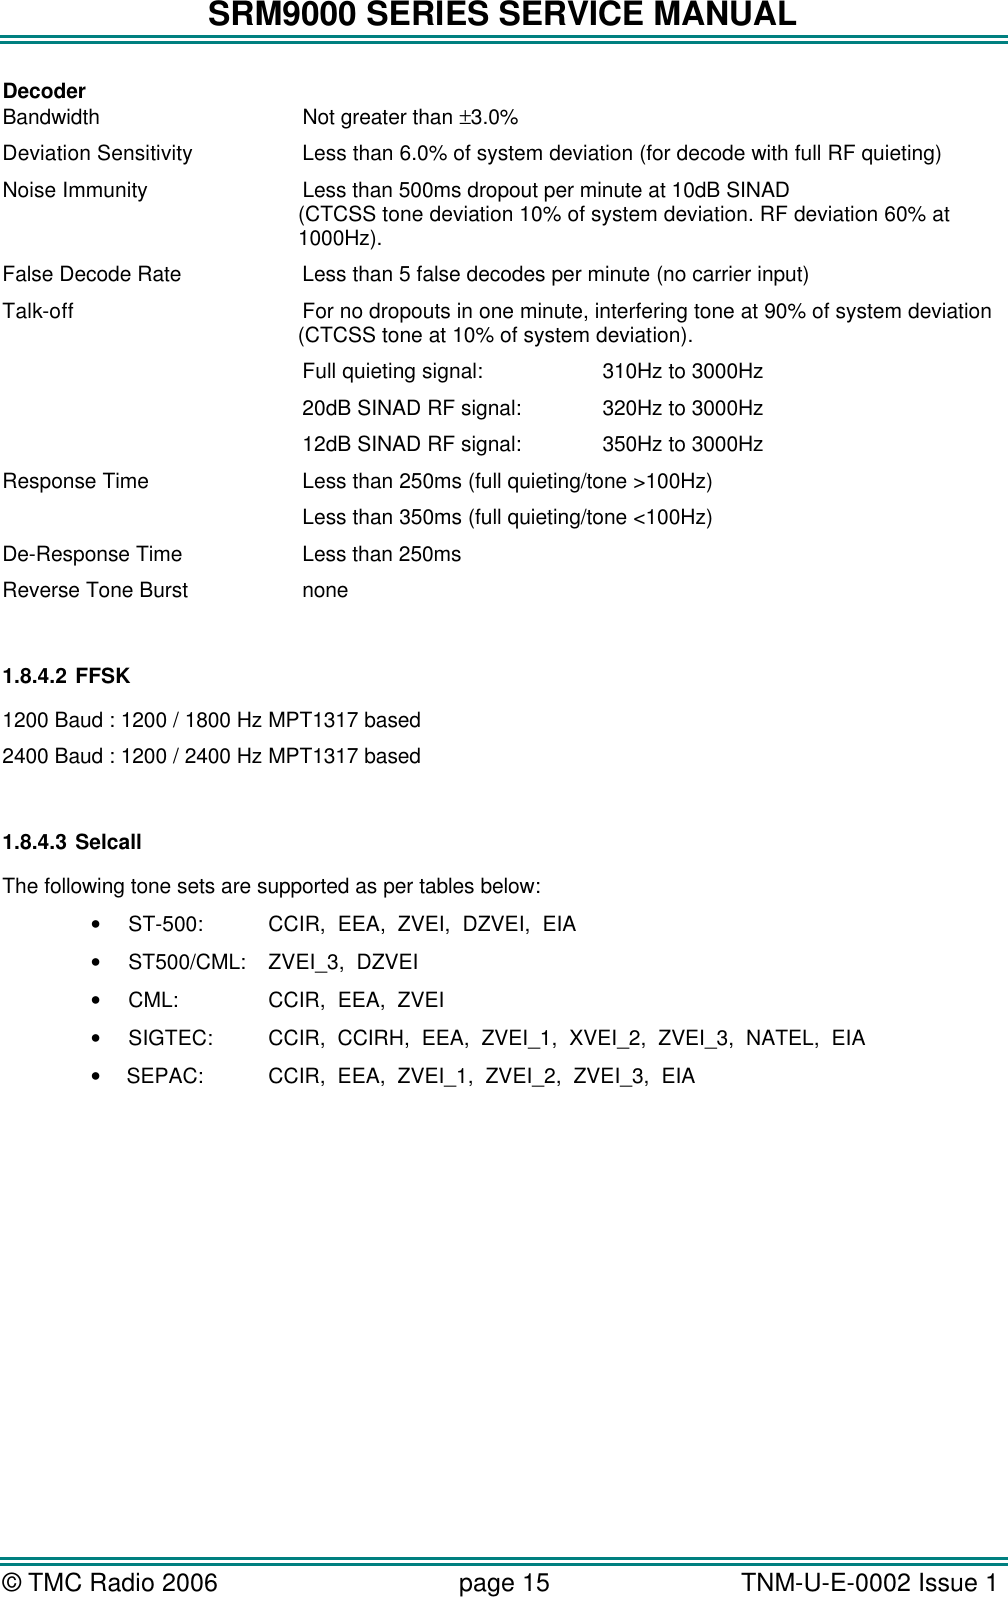 SRM9000 SERIES SERVICE MANUAL © TMC Radio 2006 page 15   TNM-U-E-0002 Issue 1  Decoder Bandwidth   Not greater than ±3.0%  Deviation Sensitivity    Less than 6.0% of system deviation (for decode with full RF quieting) Noise Immunity   Less than 500ms dropout per minute at 10dB SINAD  (CTCSS tone deviation 10% of system deviation. RF deviation 60% at 1000Hz). False Decode Rate   Less than 5 false decodes per minute (no carrier input)  Talk-off    For no dropouts in one minute, interfering tone at 90% of system deviation (CTCSS tone at 10% of system deviation).     Full quieting signal:    310Hz to 3000Hz      20dB SINAD RF signal:   320Hz to 3000Hz    12dB SINAD RF signal:   350Hz to 3000Hz Response Time   Less than 250ms (full quieting/tone &gt;100Hz)      Less than 350ms (full quieting/tone &lt;100Hz) De-Response Time    Less than 250ms Reverse Tone Burst    none  1.8.4.2 FFSK 1200 Baud : 1200 / 1800 Hz MPT1317 based 2400 Baud : 1200 / 2400 Hz MPT1317 based  1.8.4.3 Selcall The following tone sets are supported as per tables below: • ST-500:    CCIR,  EEA,  ZVEI,  DZVEI,  EIA • ST500/CML:    ZVEI_3,  DZVEI • CML:    CCIR,  EEA,  ZVEI • SIGTEC:    CCIR,  CCIRH,  EEA,  ZVEI_1,  XVEI_2,  ZVEI_3,  NATEL,  EIA •  SEPAC:    CCIR,  EEA,  ZVEI_1,  ZVEI_2,  ZVEI_3,  EIA    